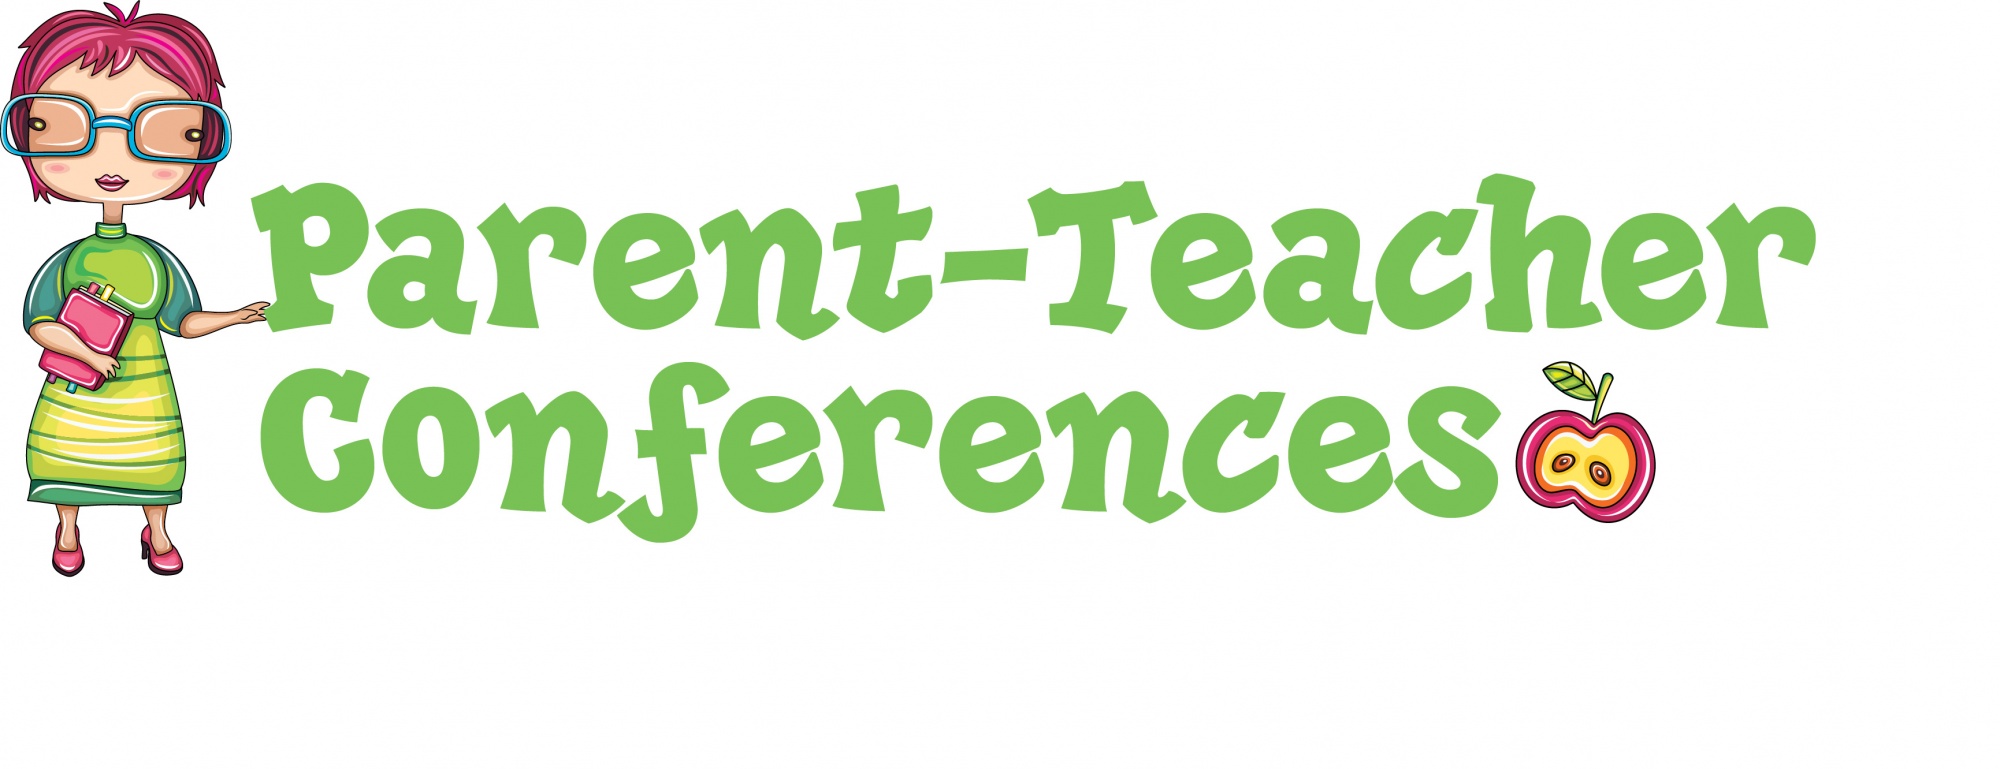 Student Conference Clipart   Cliparthut   Free Clipart